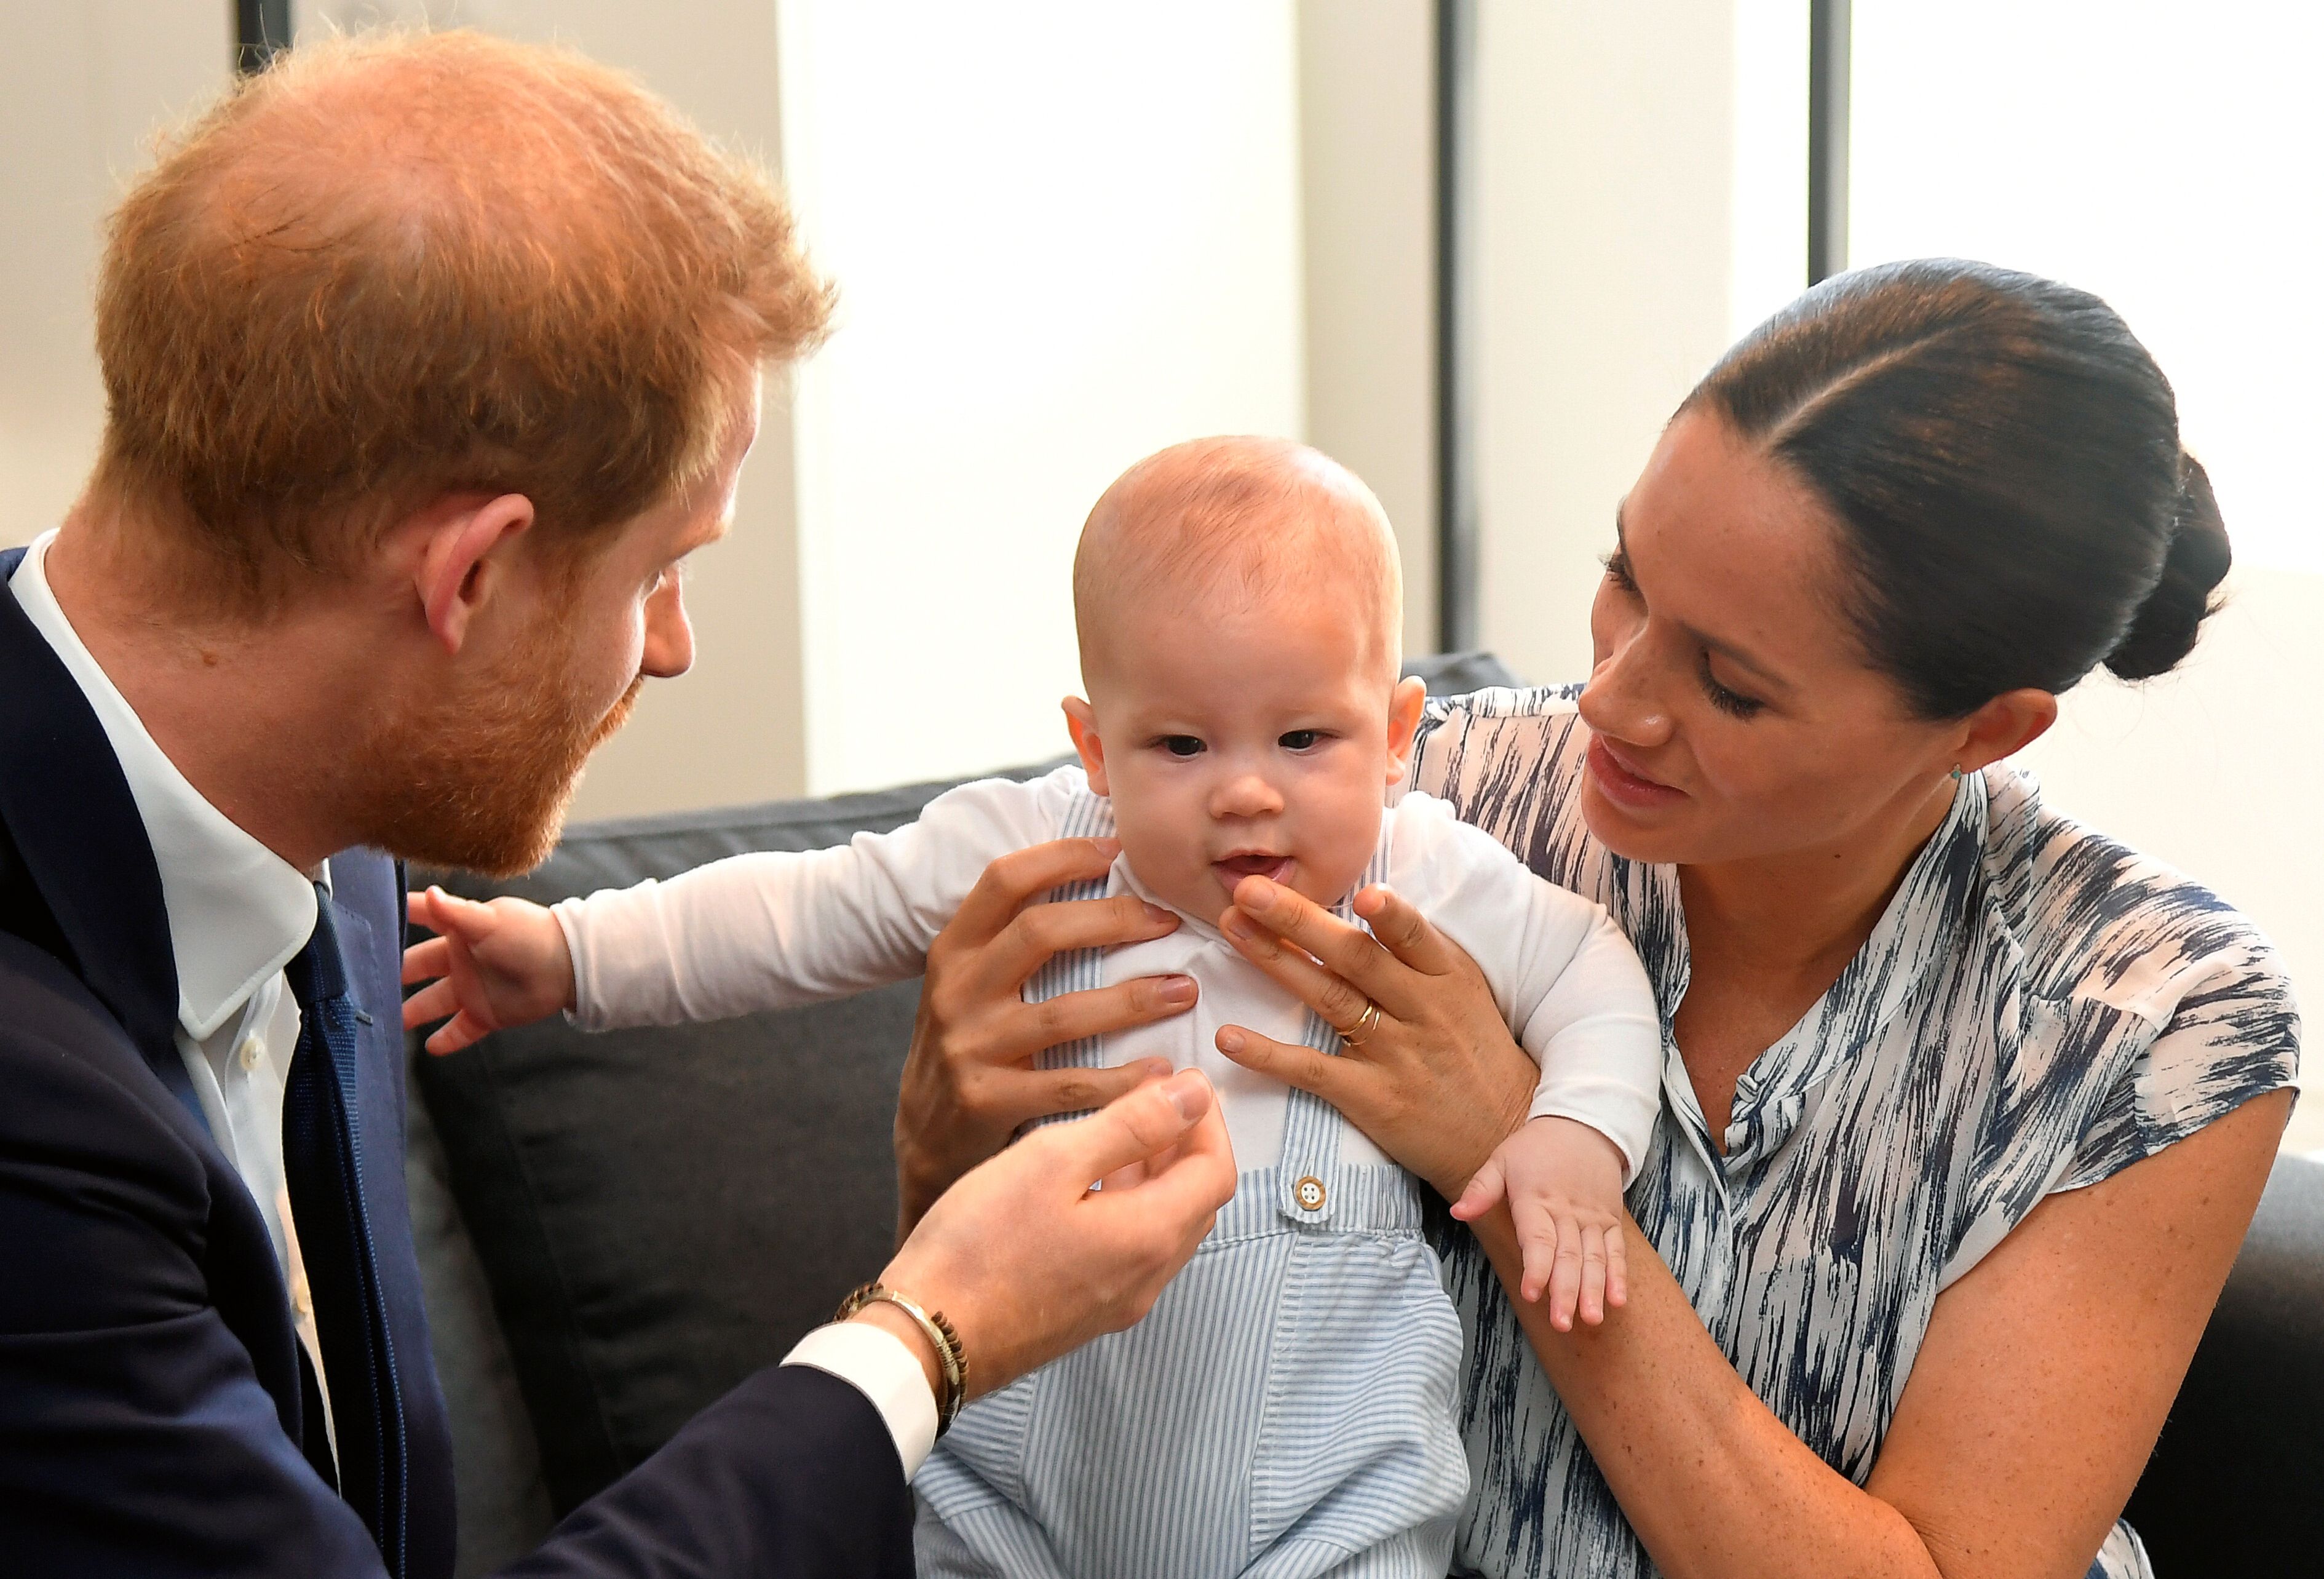 The Duke and Duchess of Sussex and Baby Archie during their visit to Archbishop Tutu in Cape Town, South Africa | Source: Getty Images/GlobalImagesUkraine